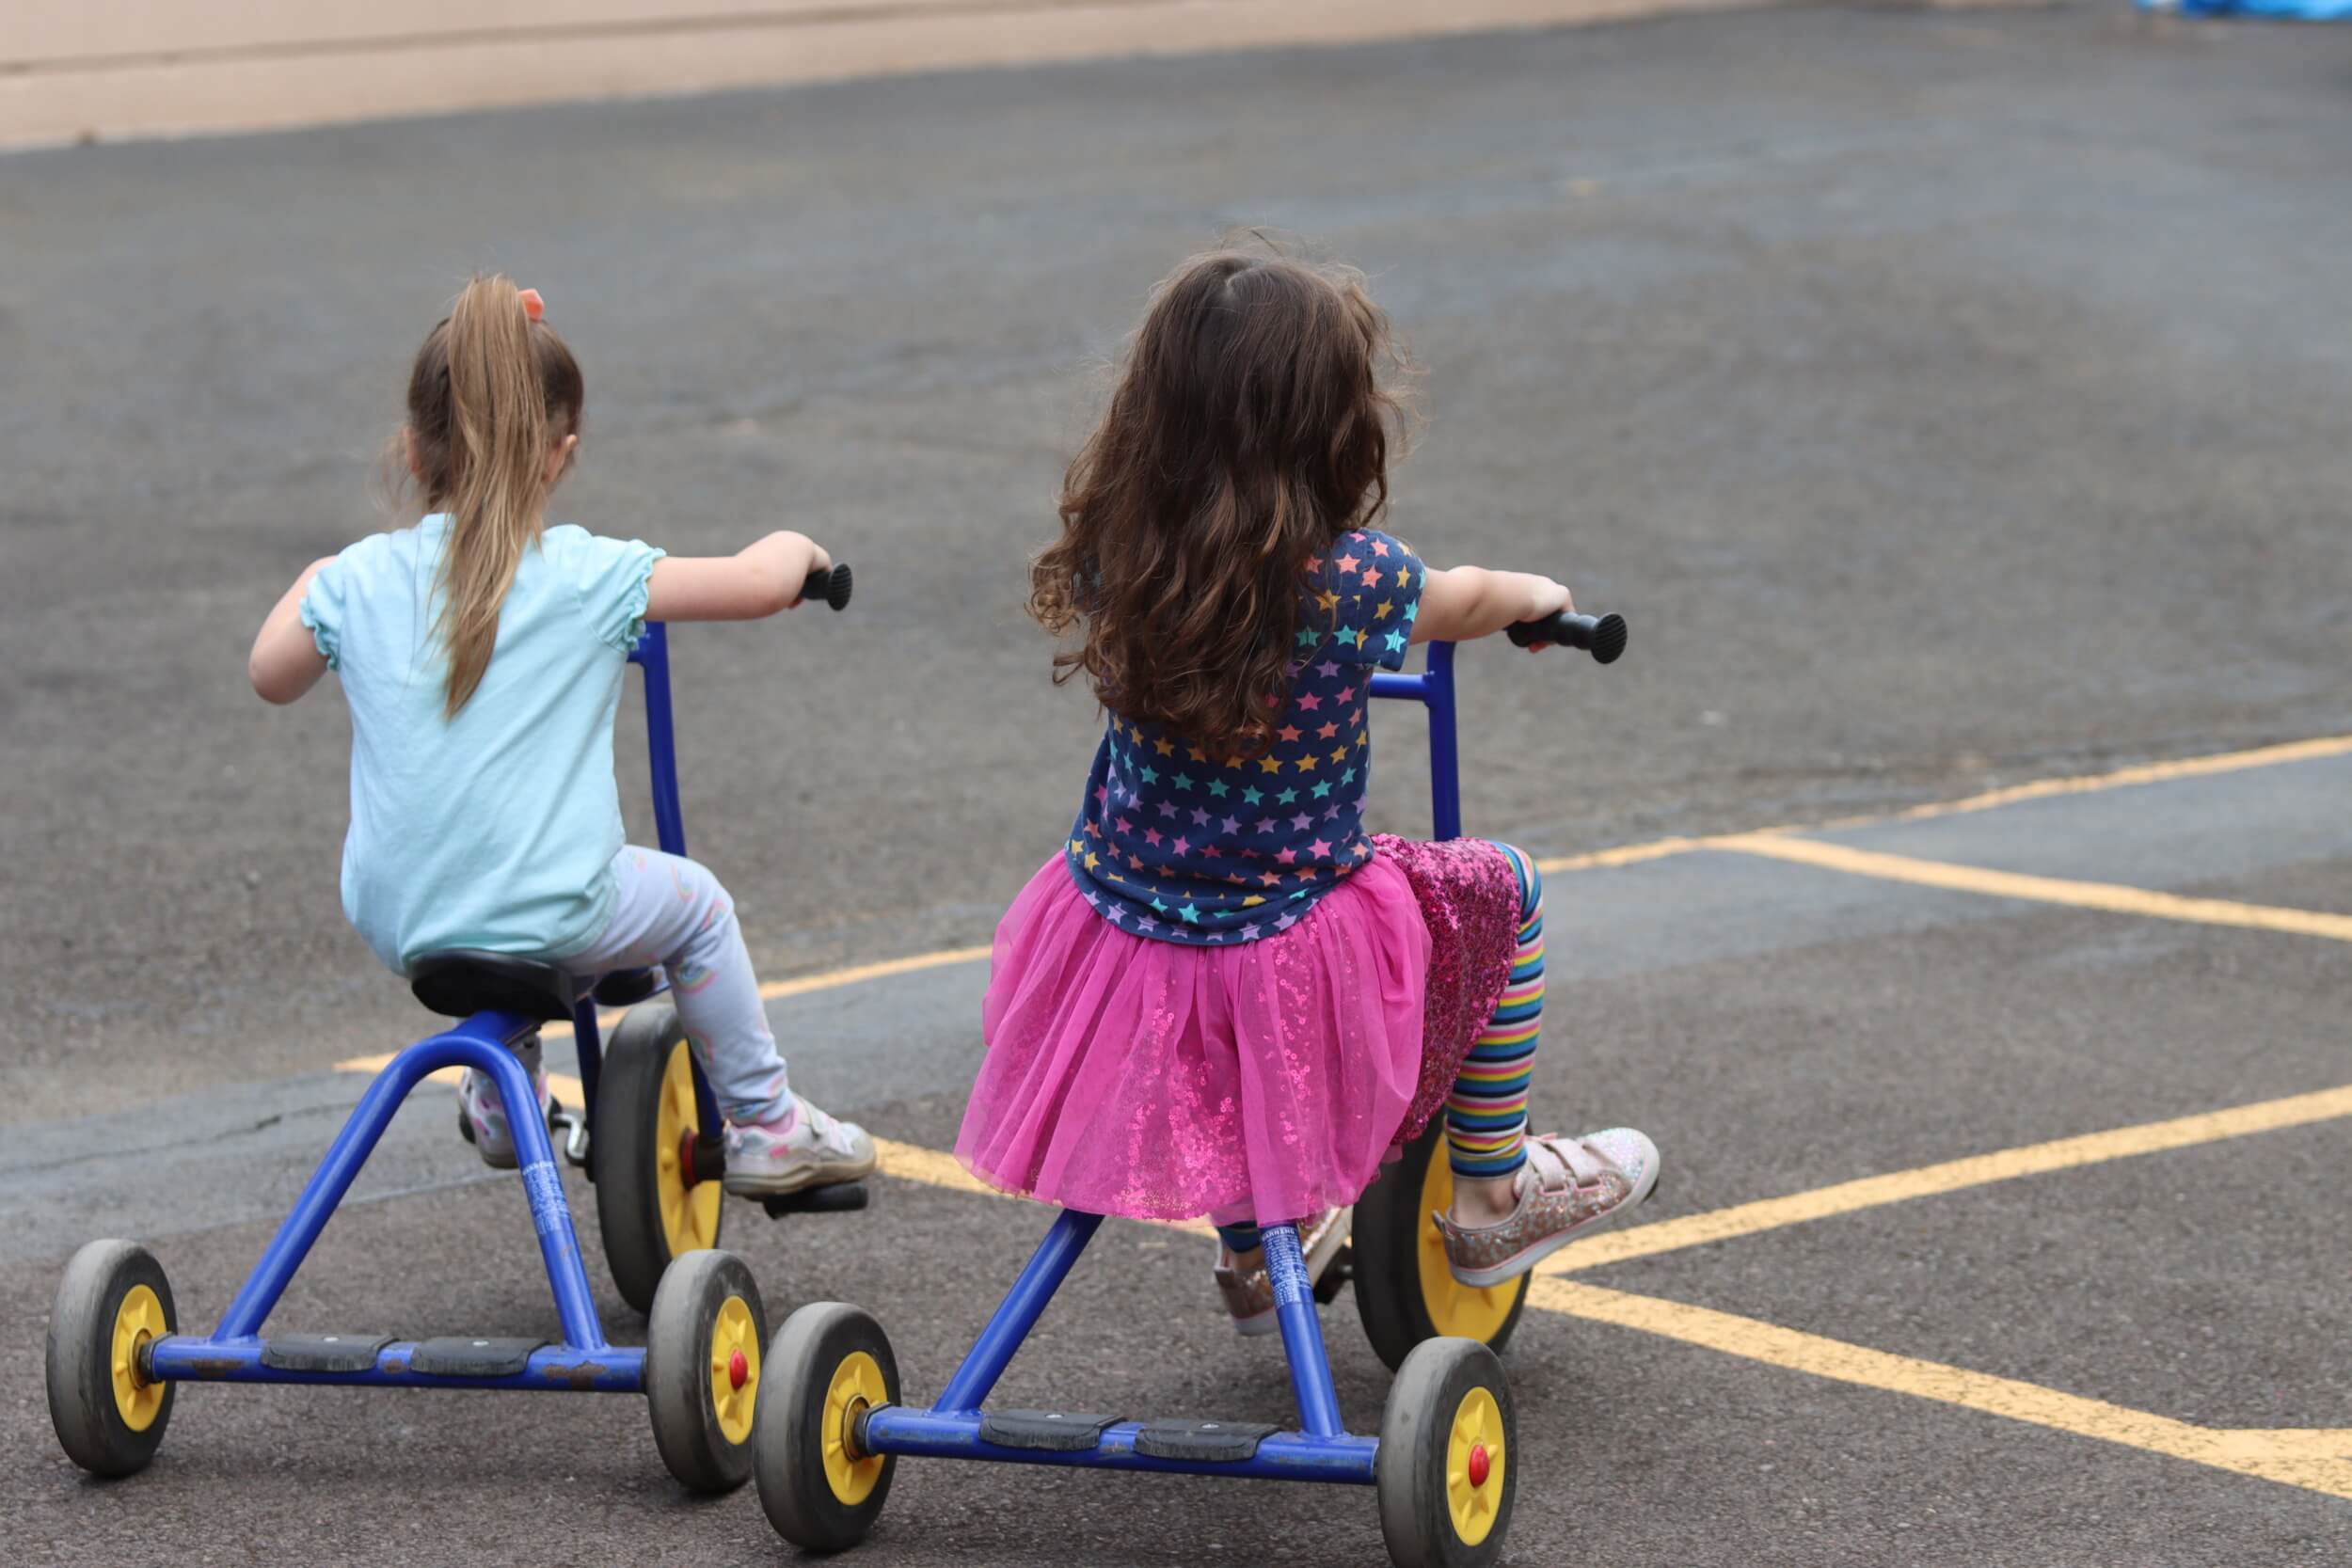 Two kindergarten students riding tricycles together at recess